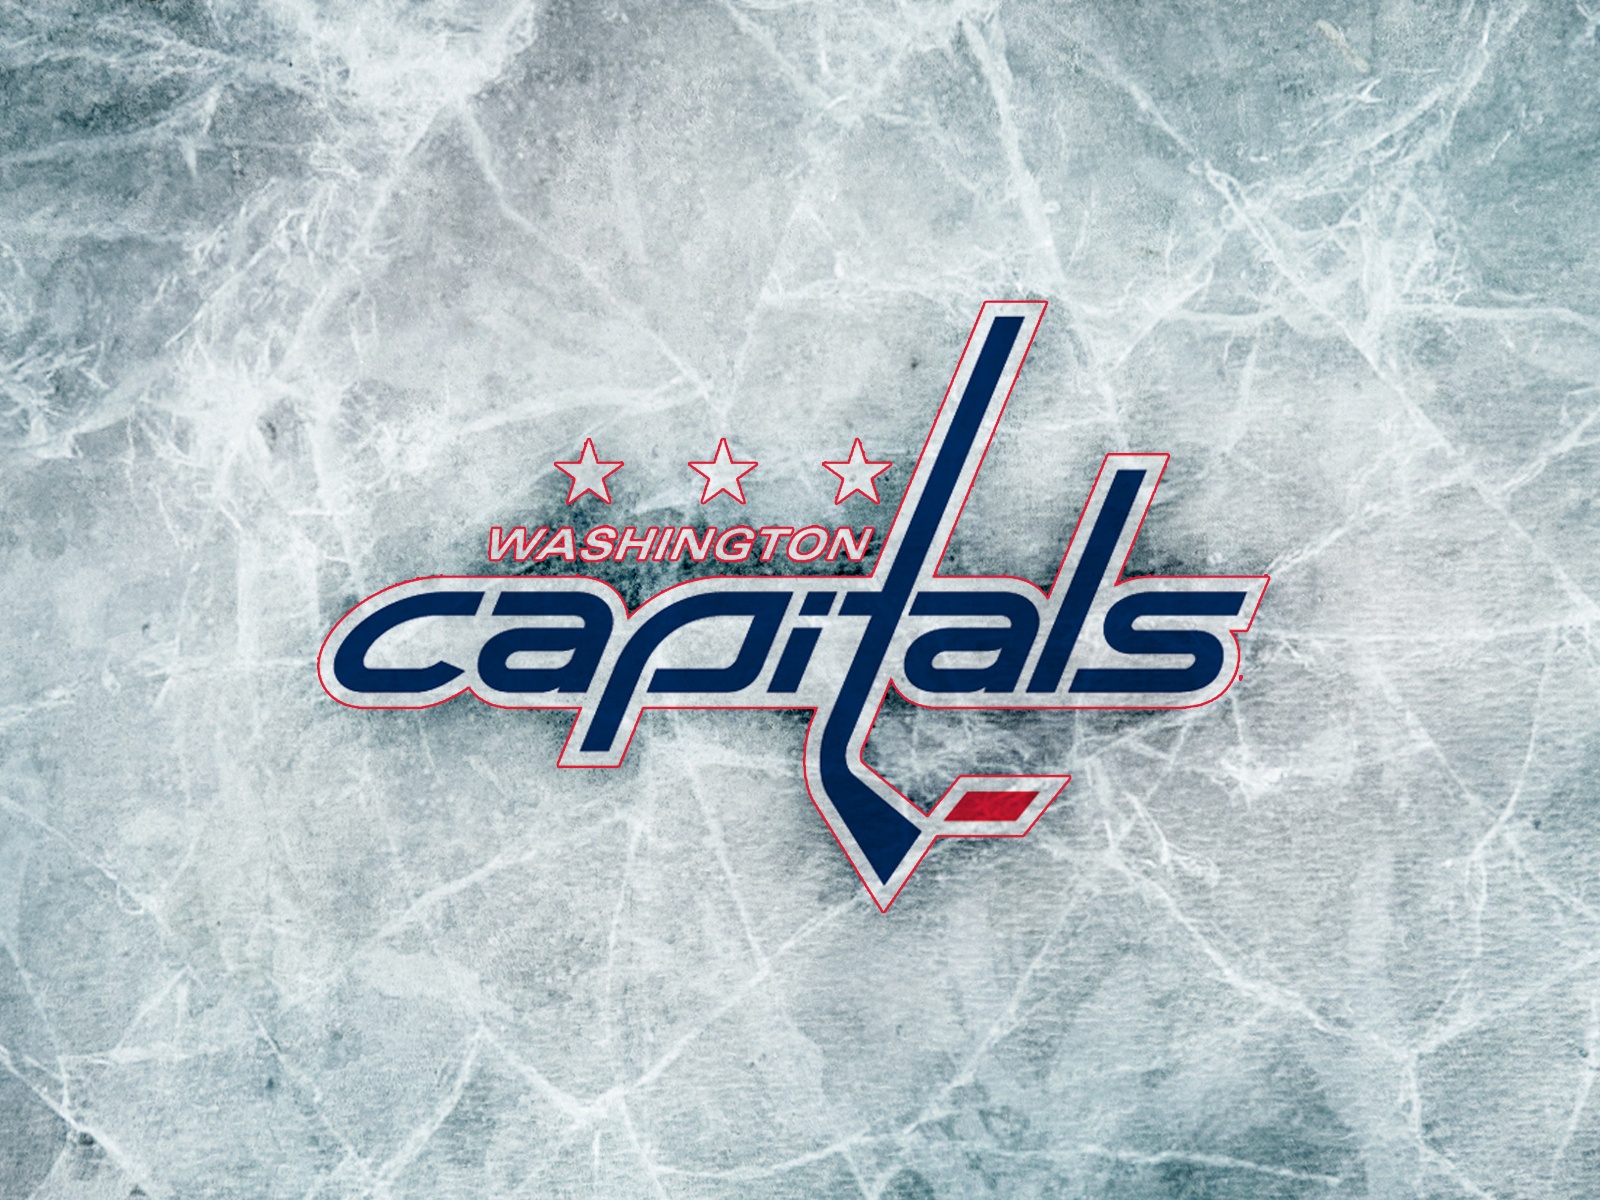 PC Nhl Awesome Wallpapers BSCB